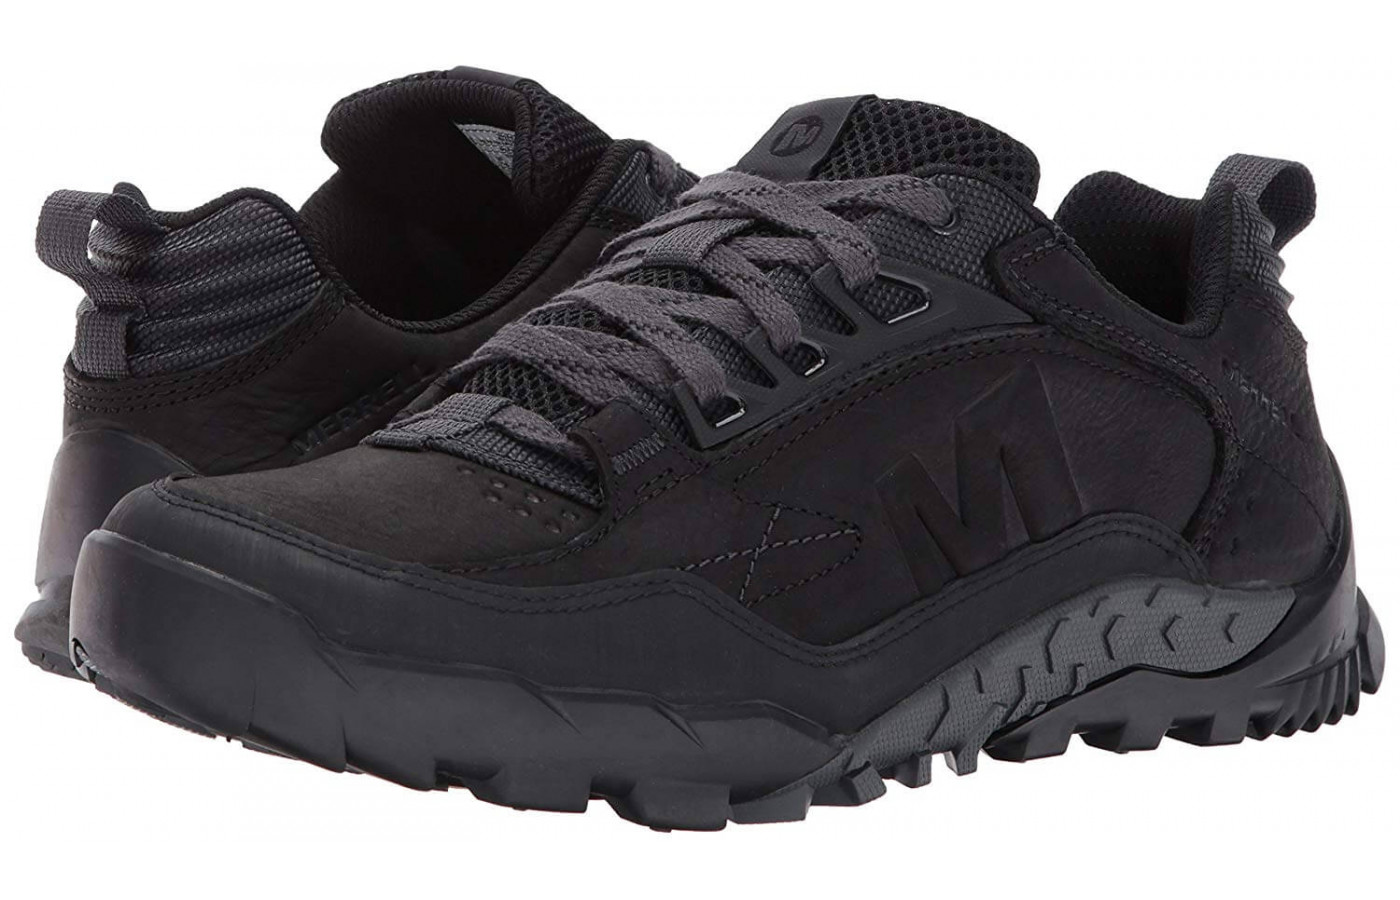 The Merrell Men's Annex Trak Low Shoe is affordable